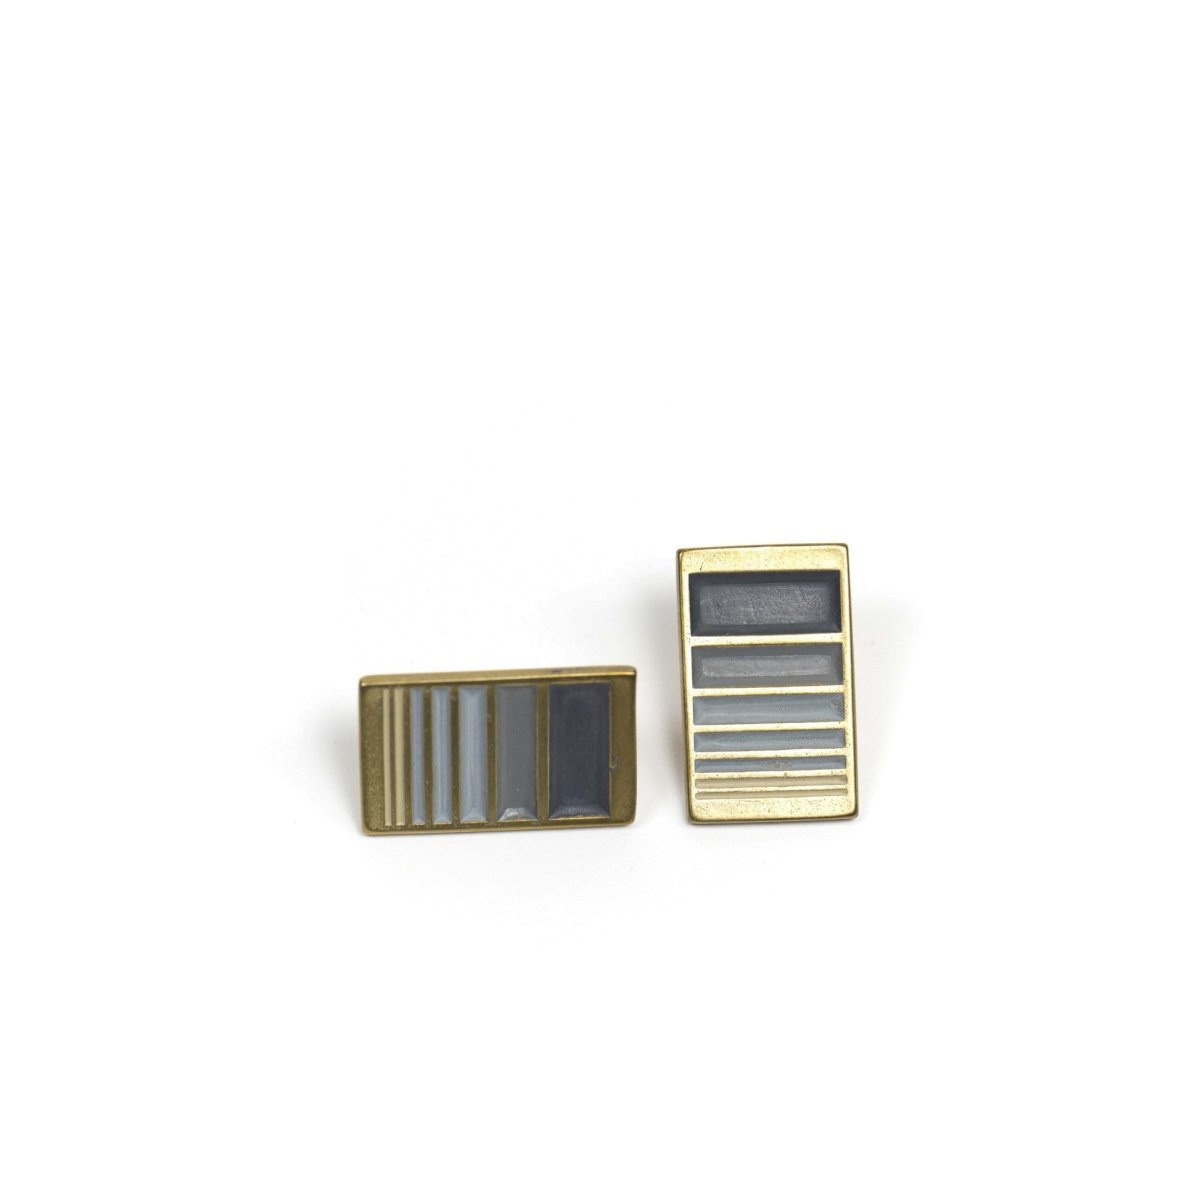 A pair of rectangular, cast-bronze stud earrings, decorated in our Portland colorway, with a gradient of gray paint. Hand-crafted in Portland, Oregon. 